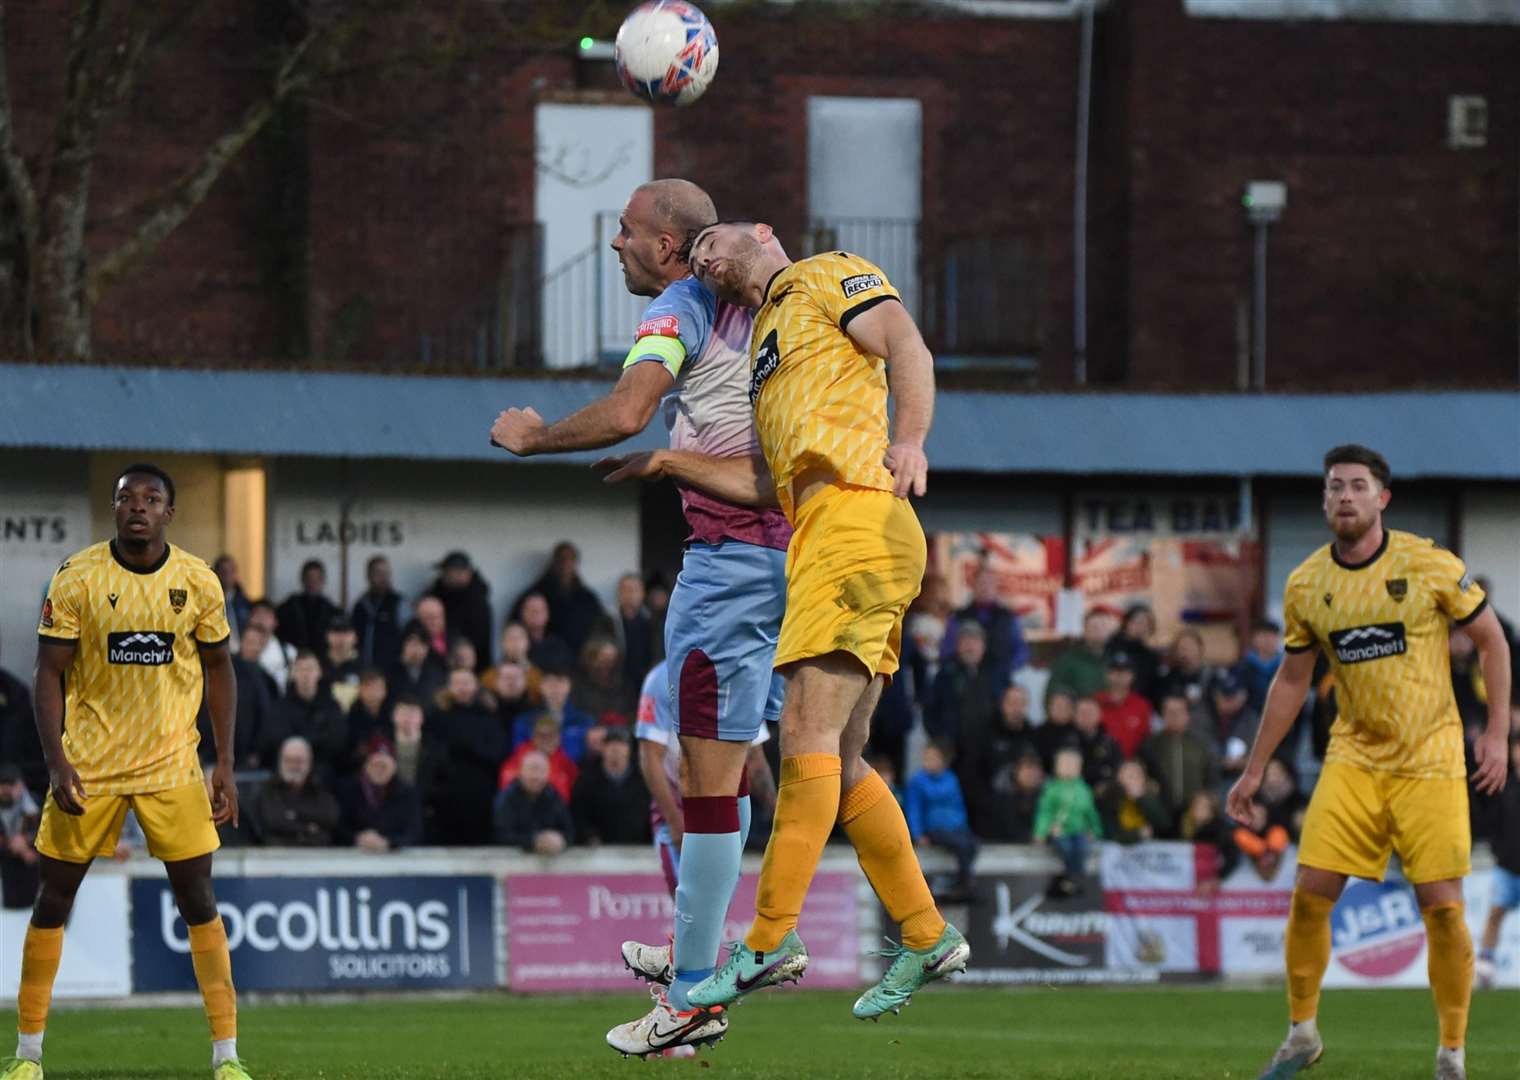 Chesham and Maidstone challenge in the air during their FA Cup First Round tie on Saturday. Picture: Steve Terrell